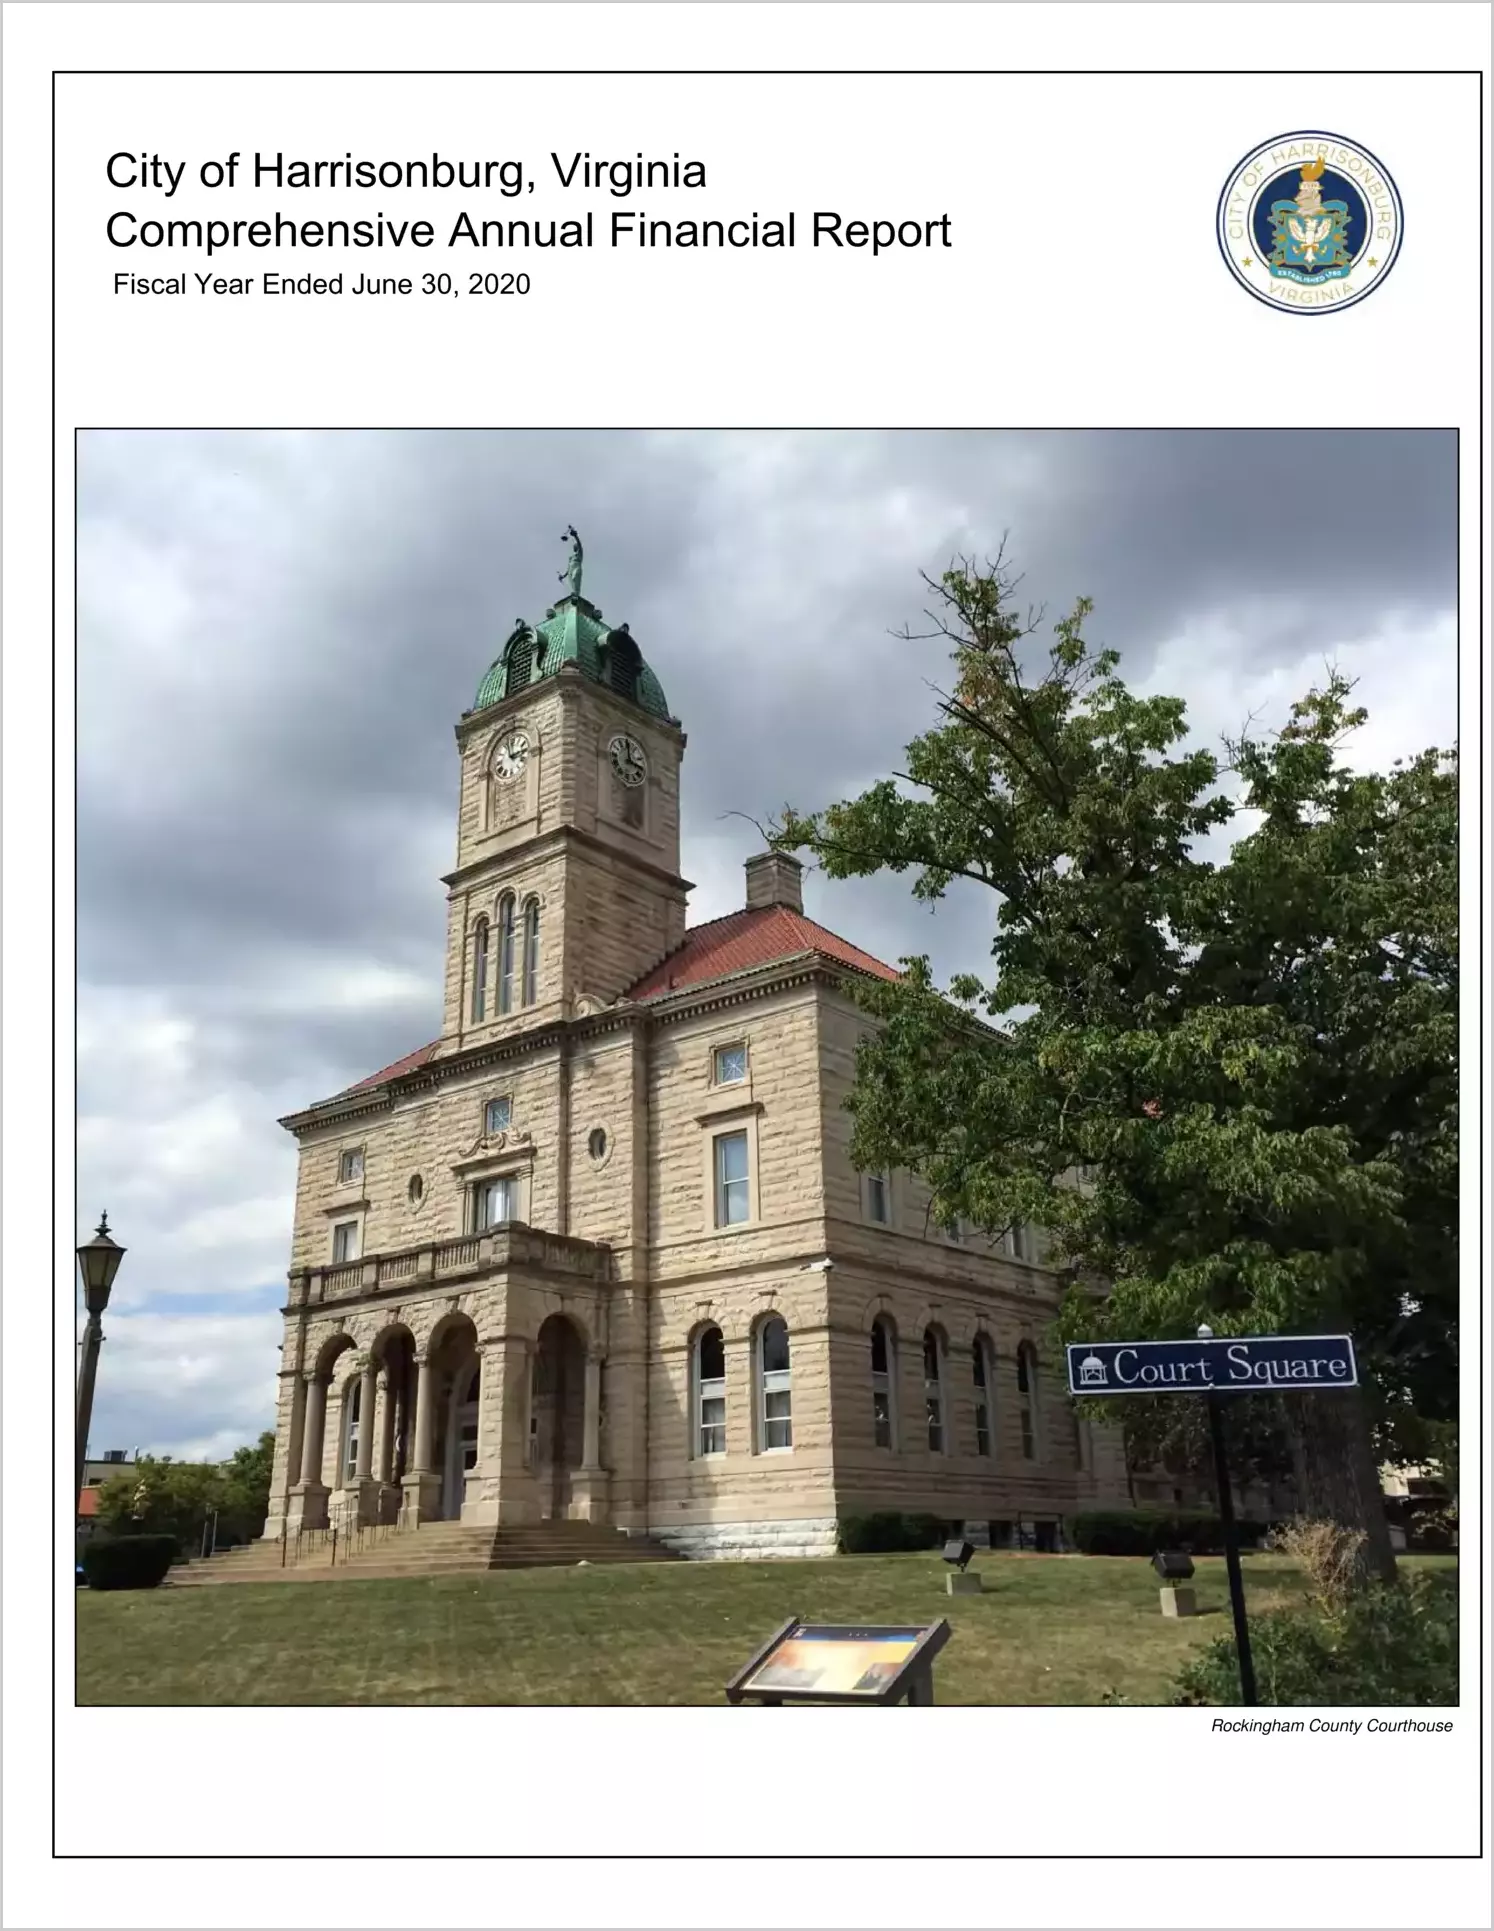 2020 Annual Financial Report for City of Harrisonburg